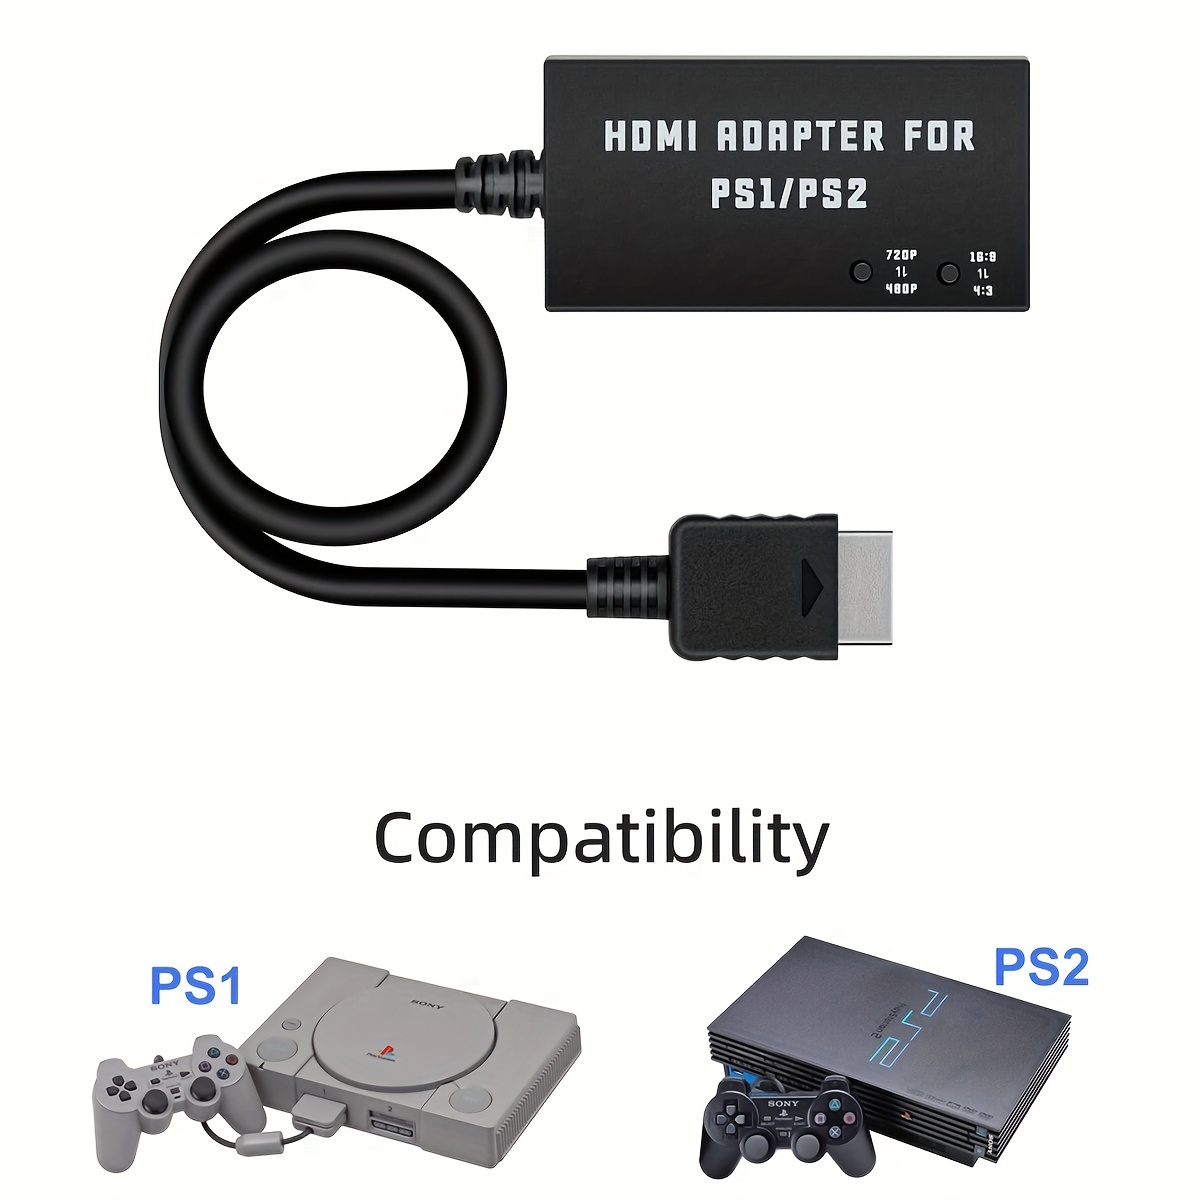 HDMI Adapter HDTV cable for Sony PS2 & PS1 720p 16:9 & 4:3 aspect